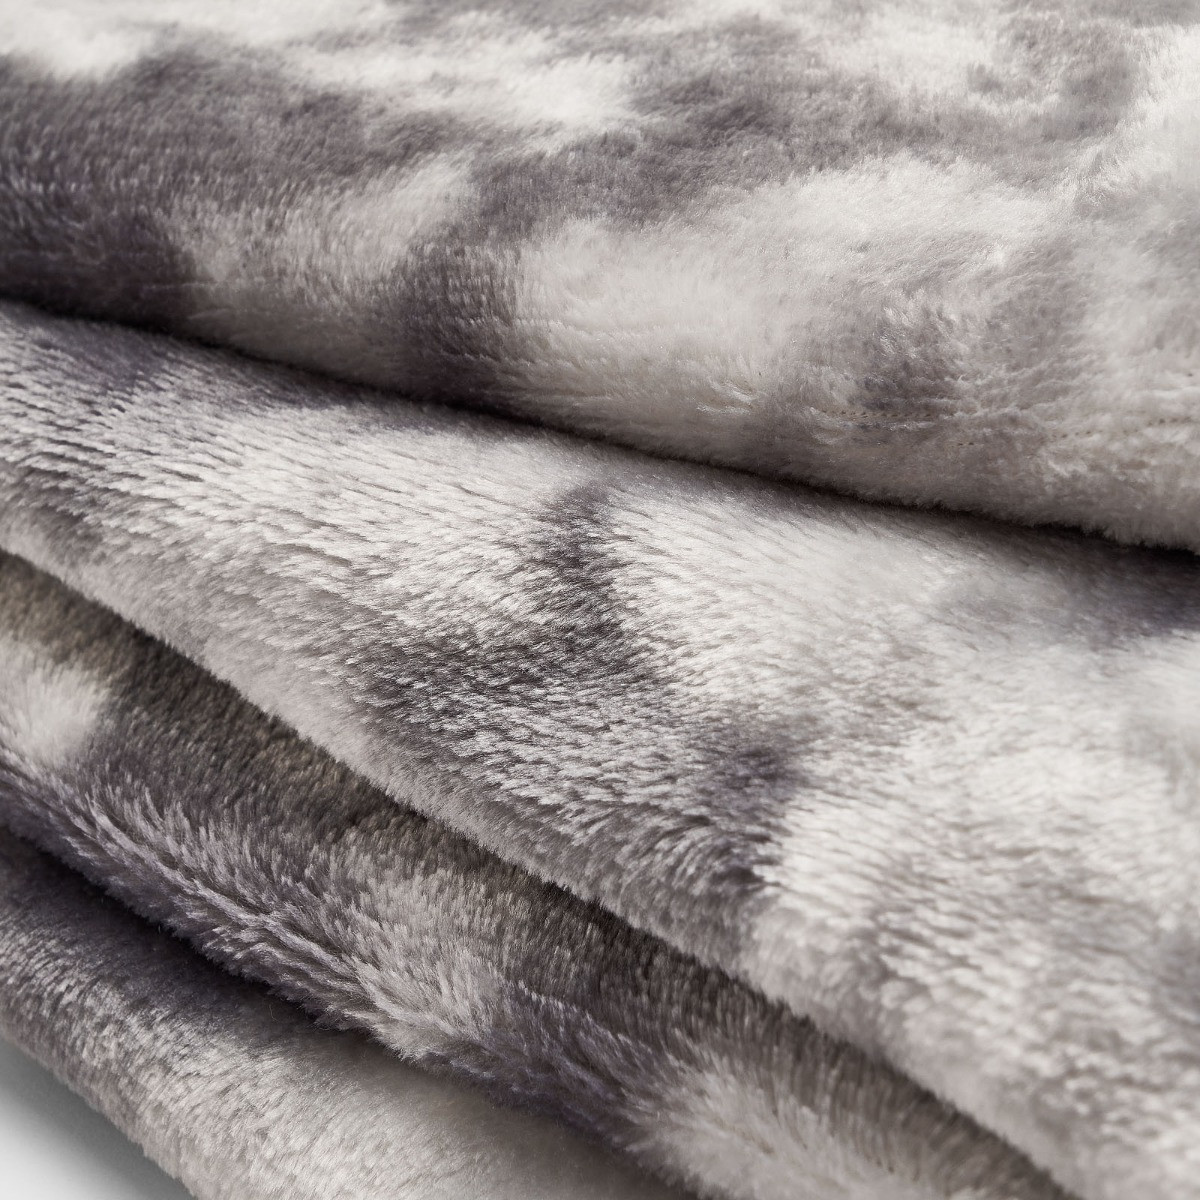 Dreamscene by OHS Tie Dye Supersoft Throw Blanket, Grey - 47 x 60 inches>